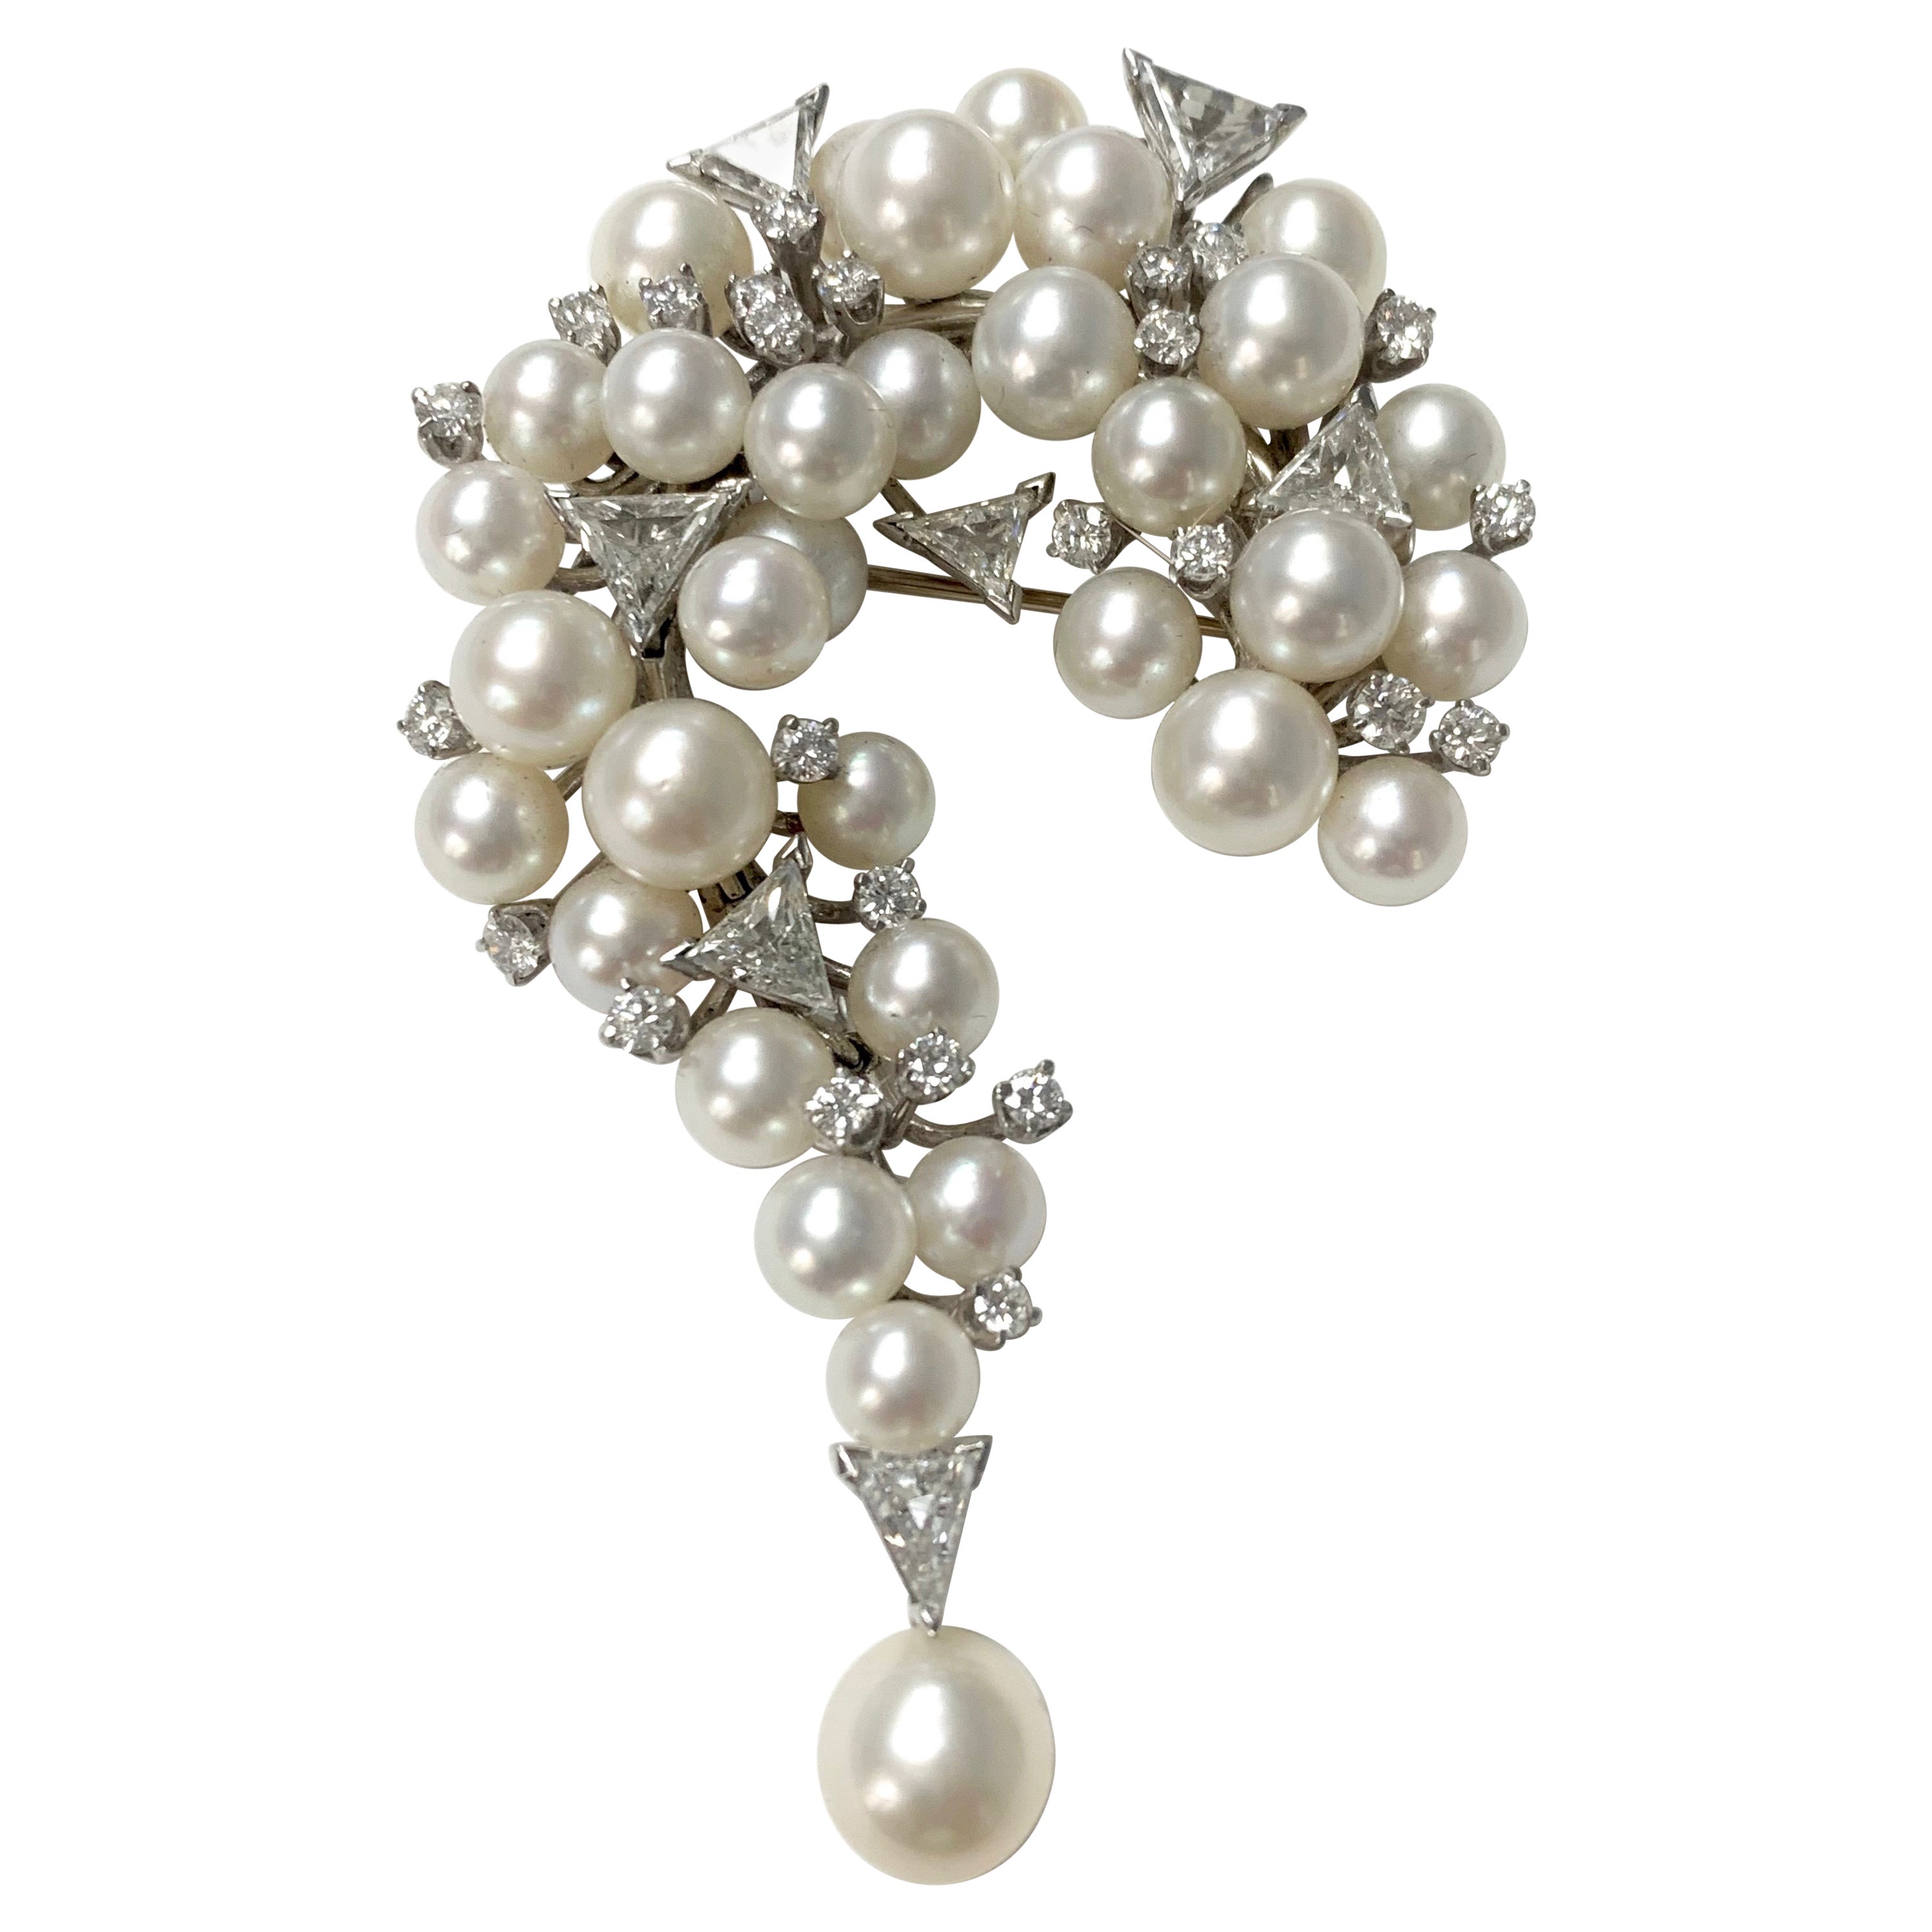 Diamond and Pearl Brooch in Platinum